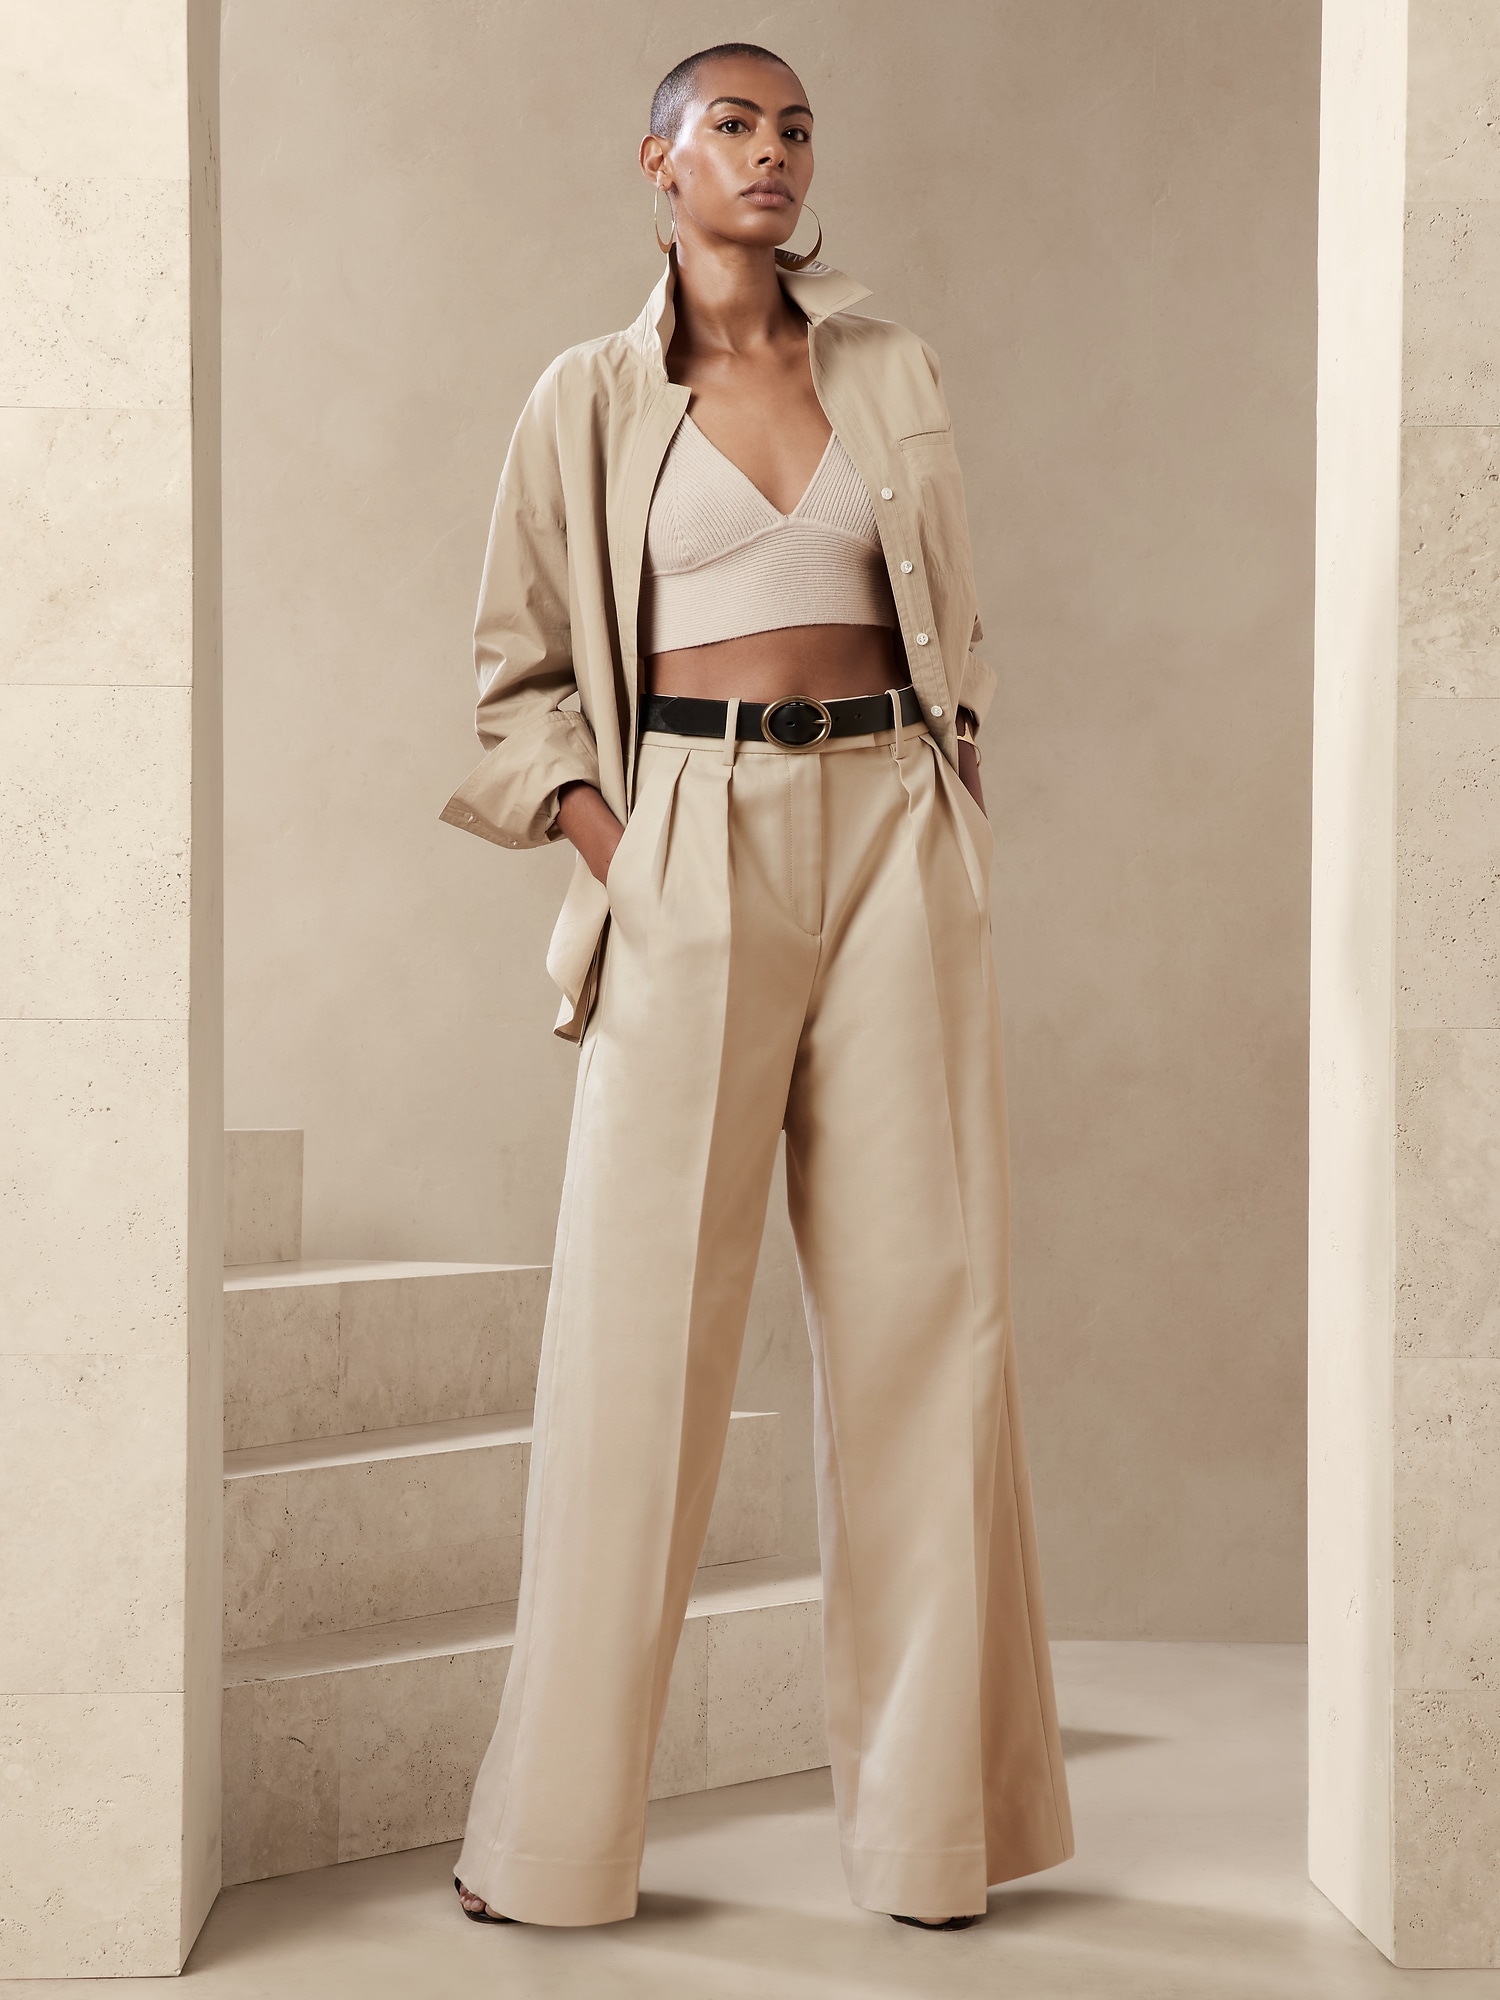 Classic in Camel // Wide leg pants for petites - Extra Petite